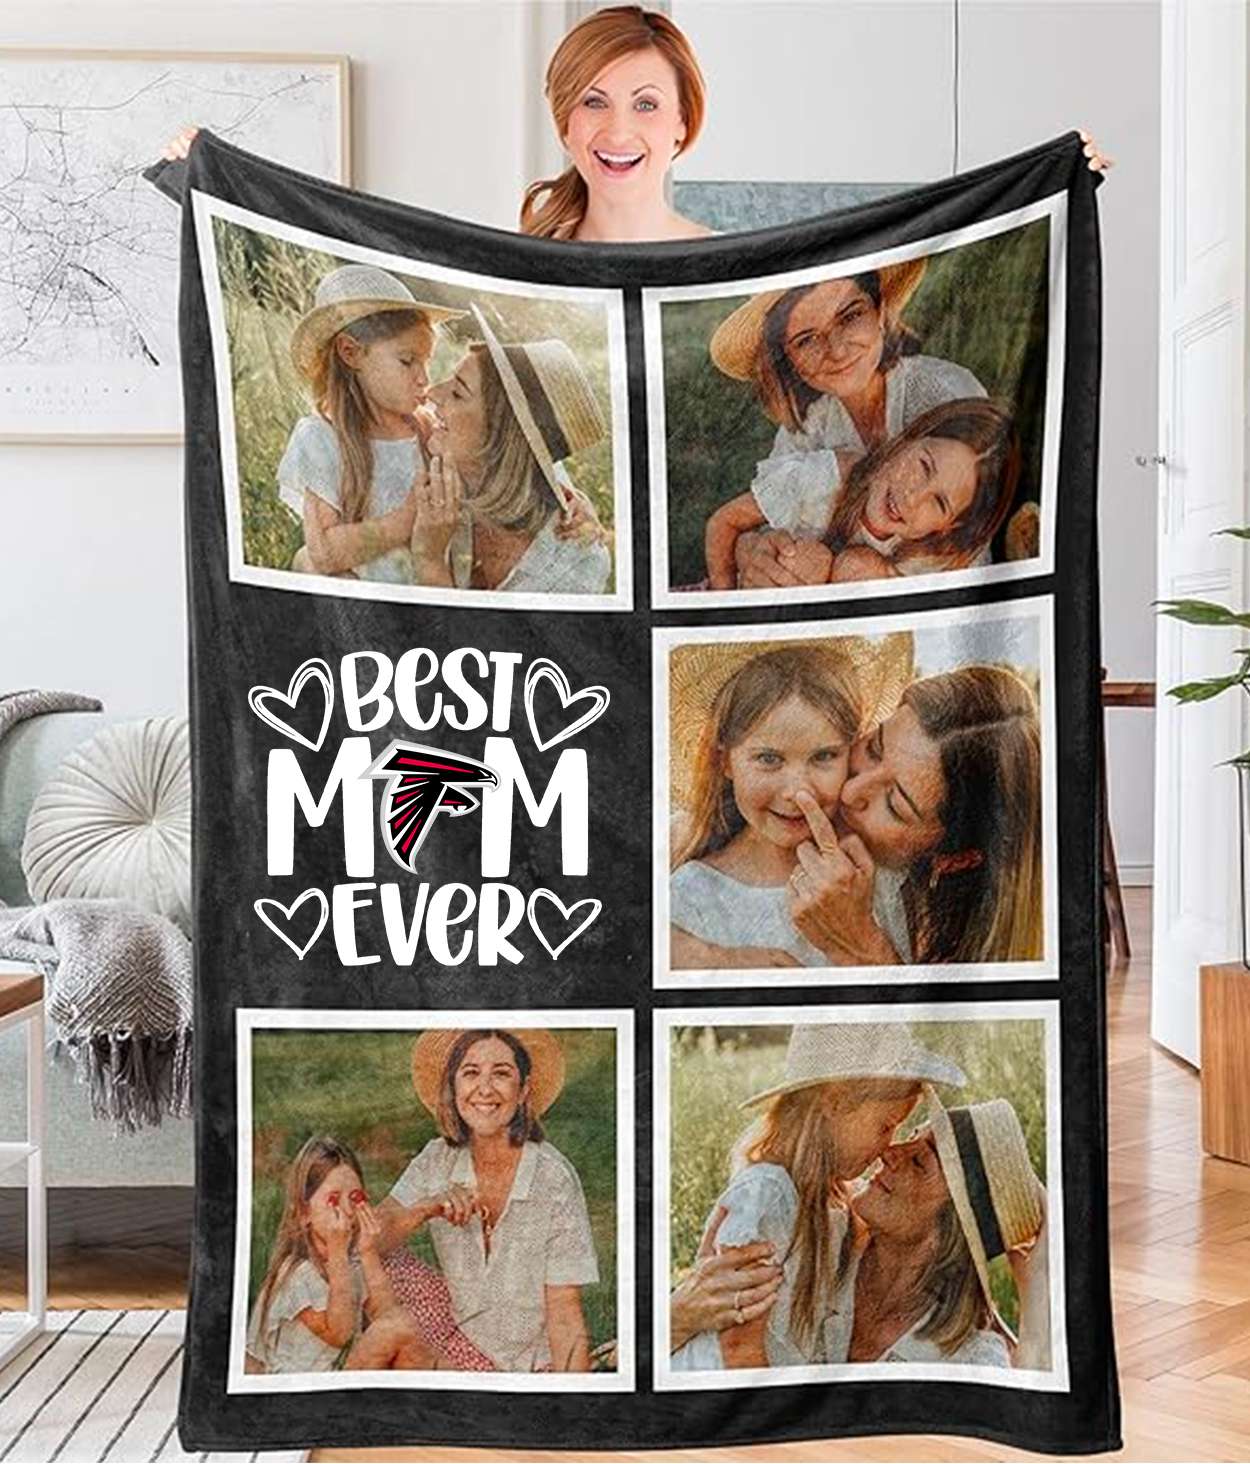 Best Mom Ever - Custom NFL Atlanta Falcons Blankets with Pictures for Mother's Day Gift